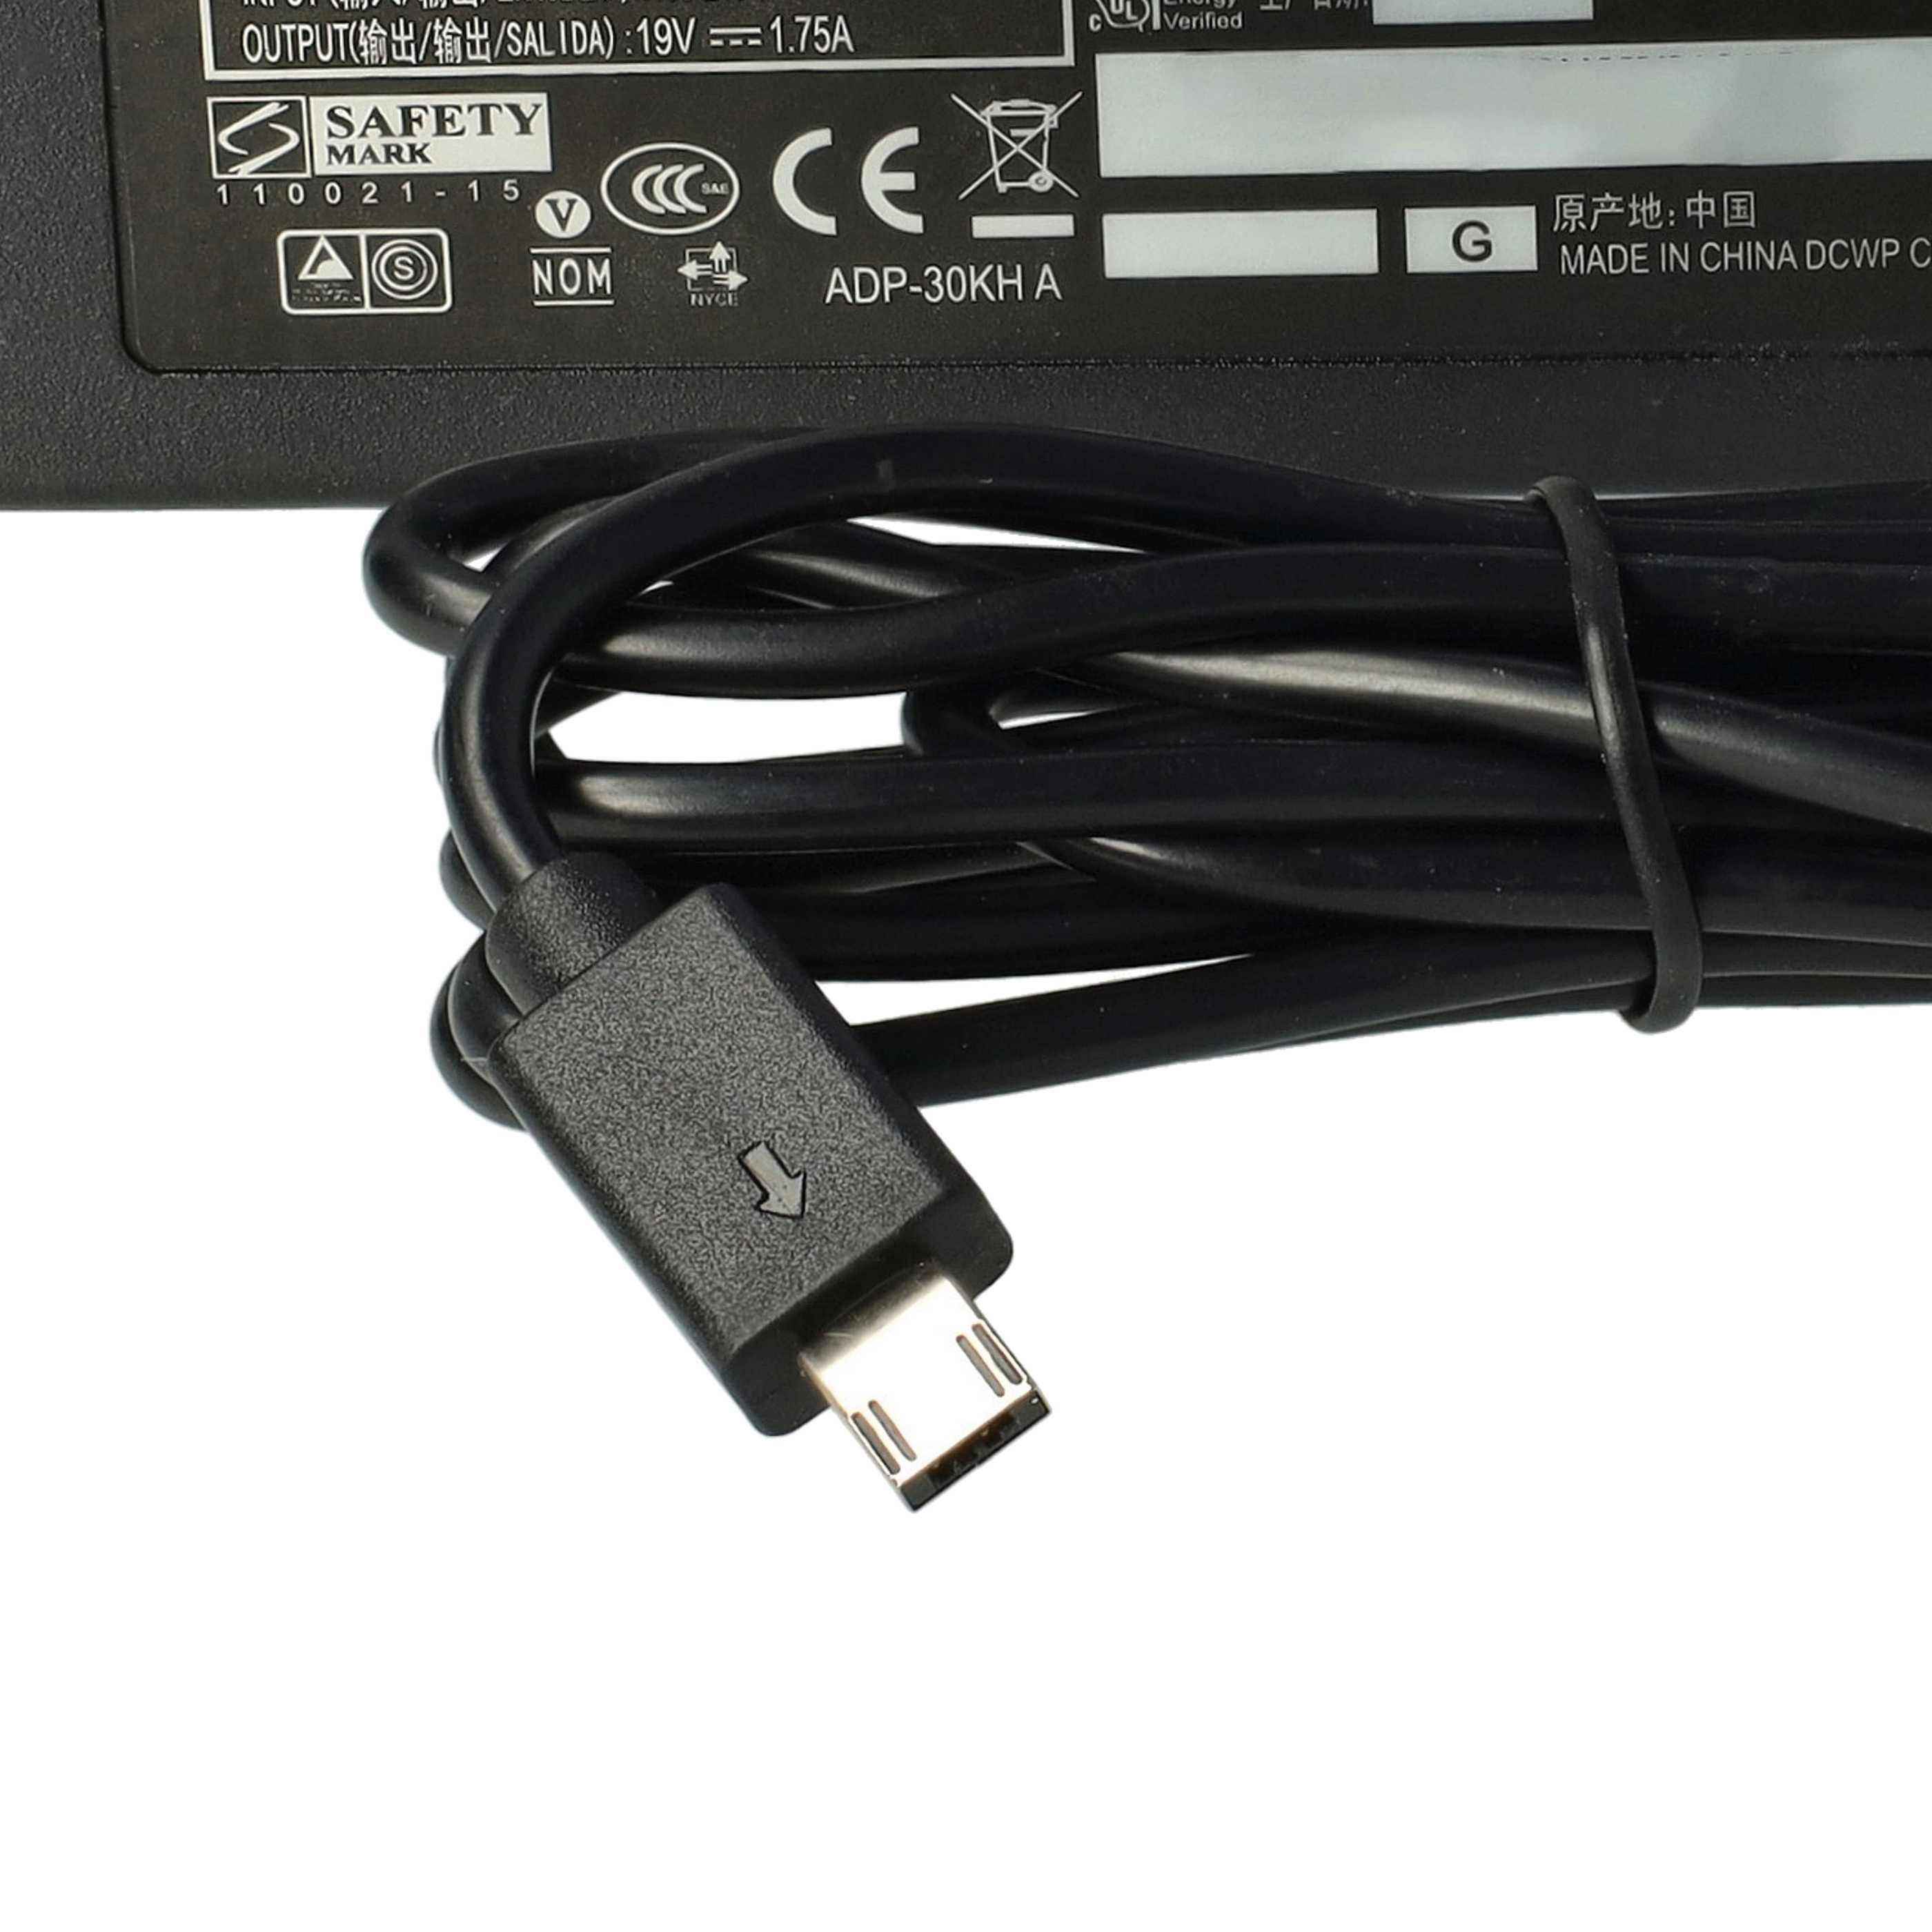 Mains Power Adapter replaces Asus 0A001-00342500, 01A001-0342100, 0A001-00342900 for AsusNotebook, 33 W